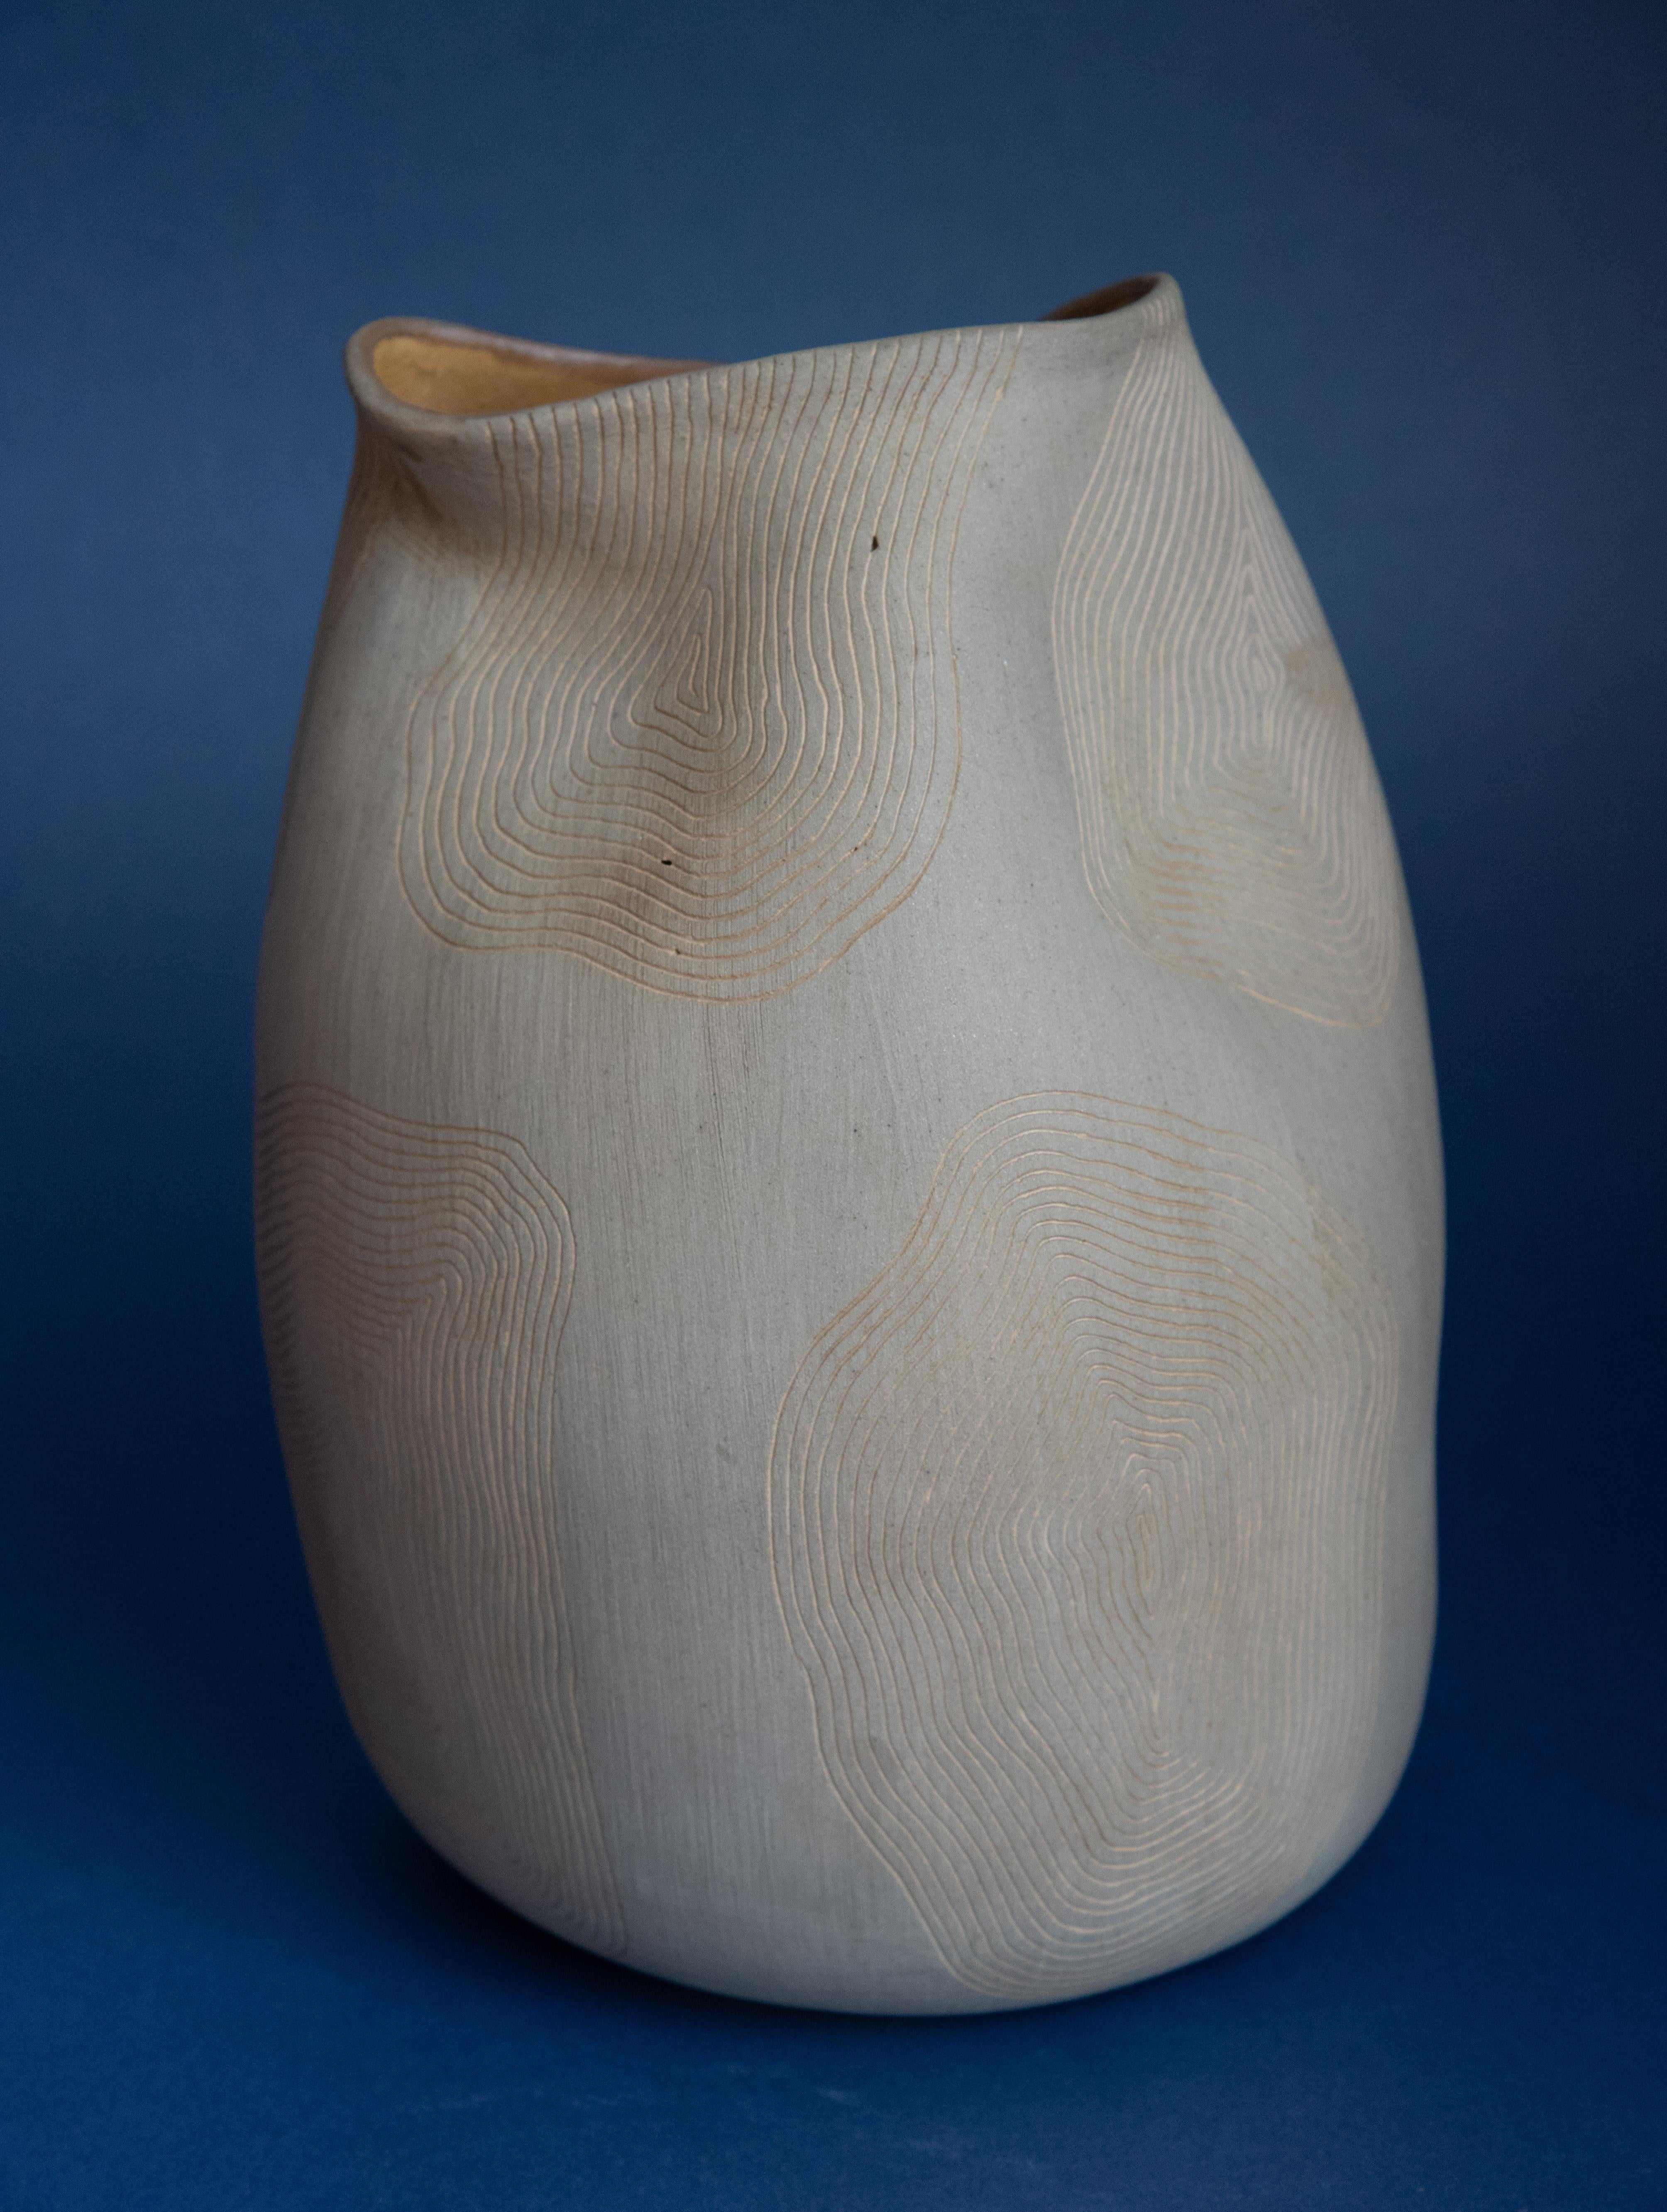 Hand-Crafted Ceramic Fingerprint Design Abstract Organic Form Vase, Handmade in Mexico